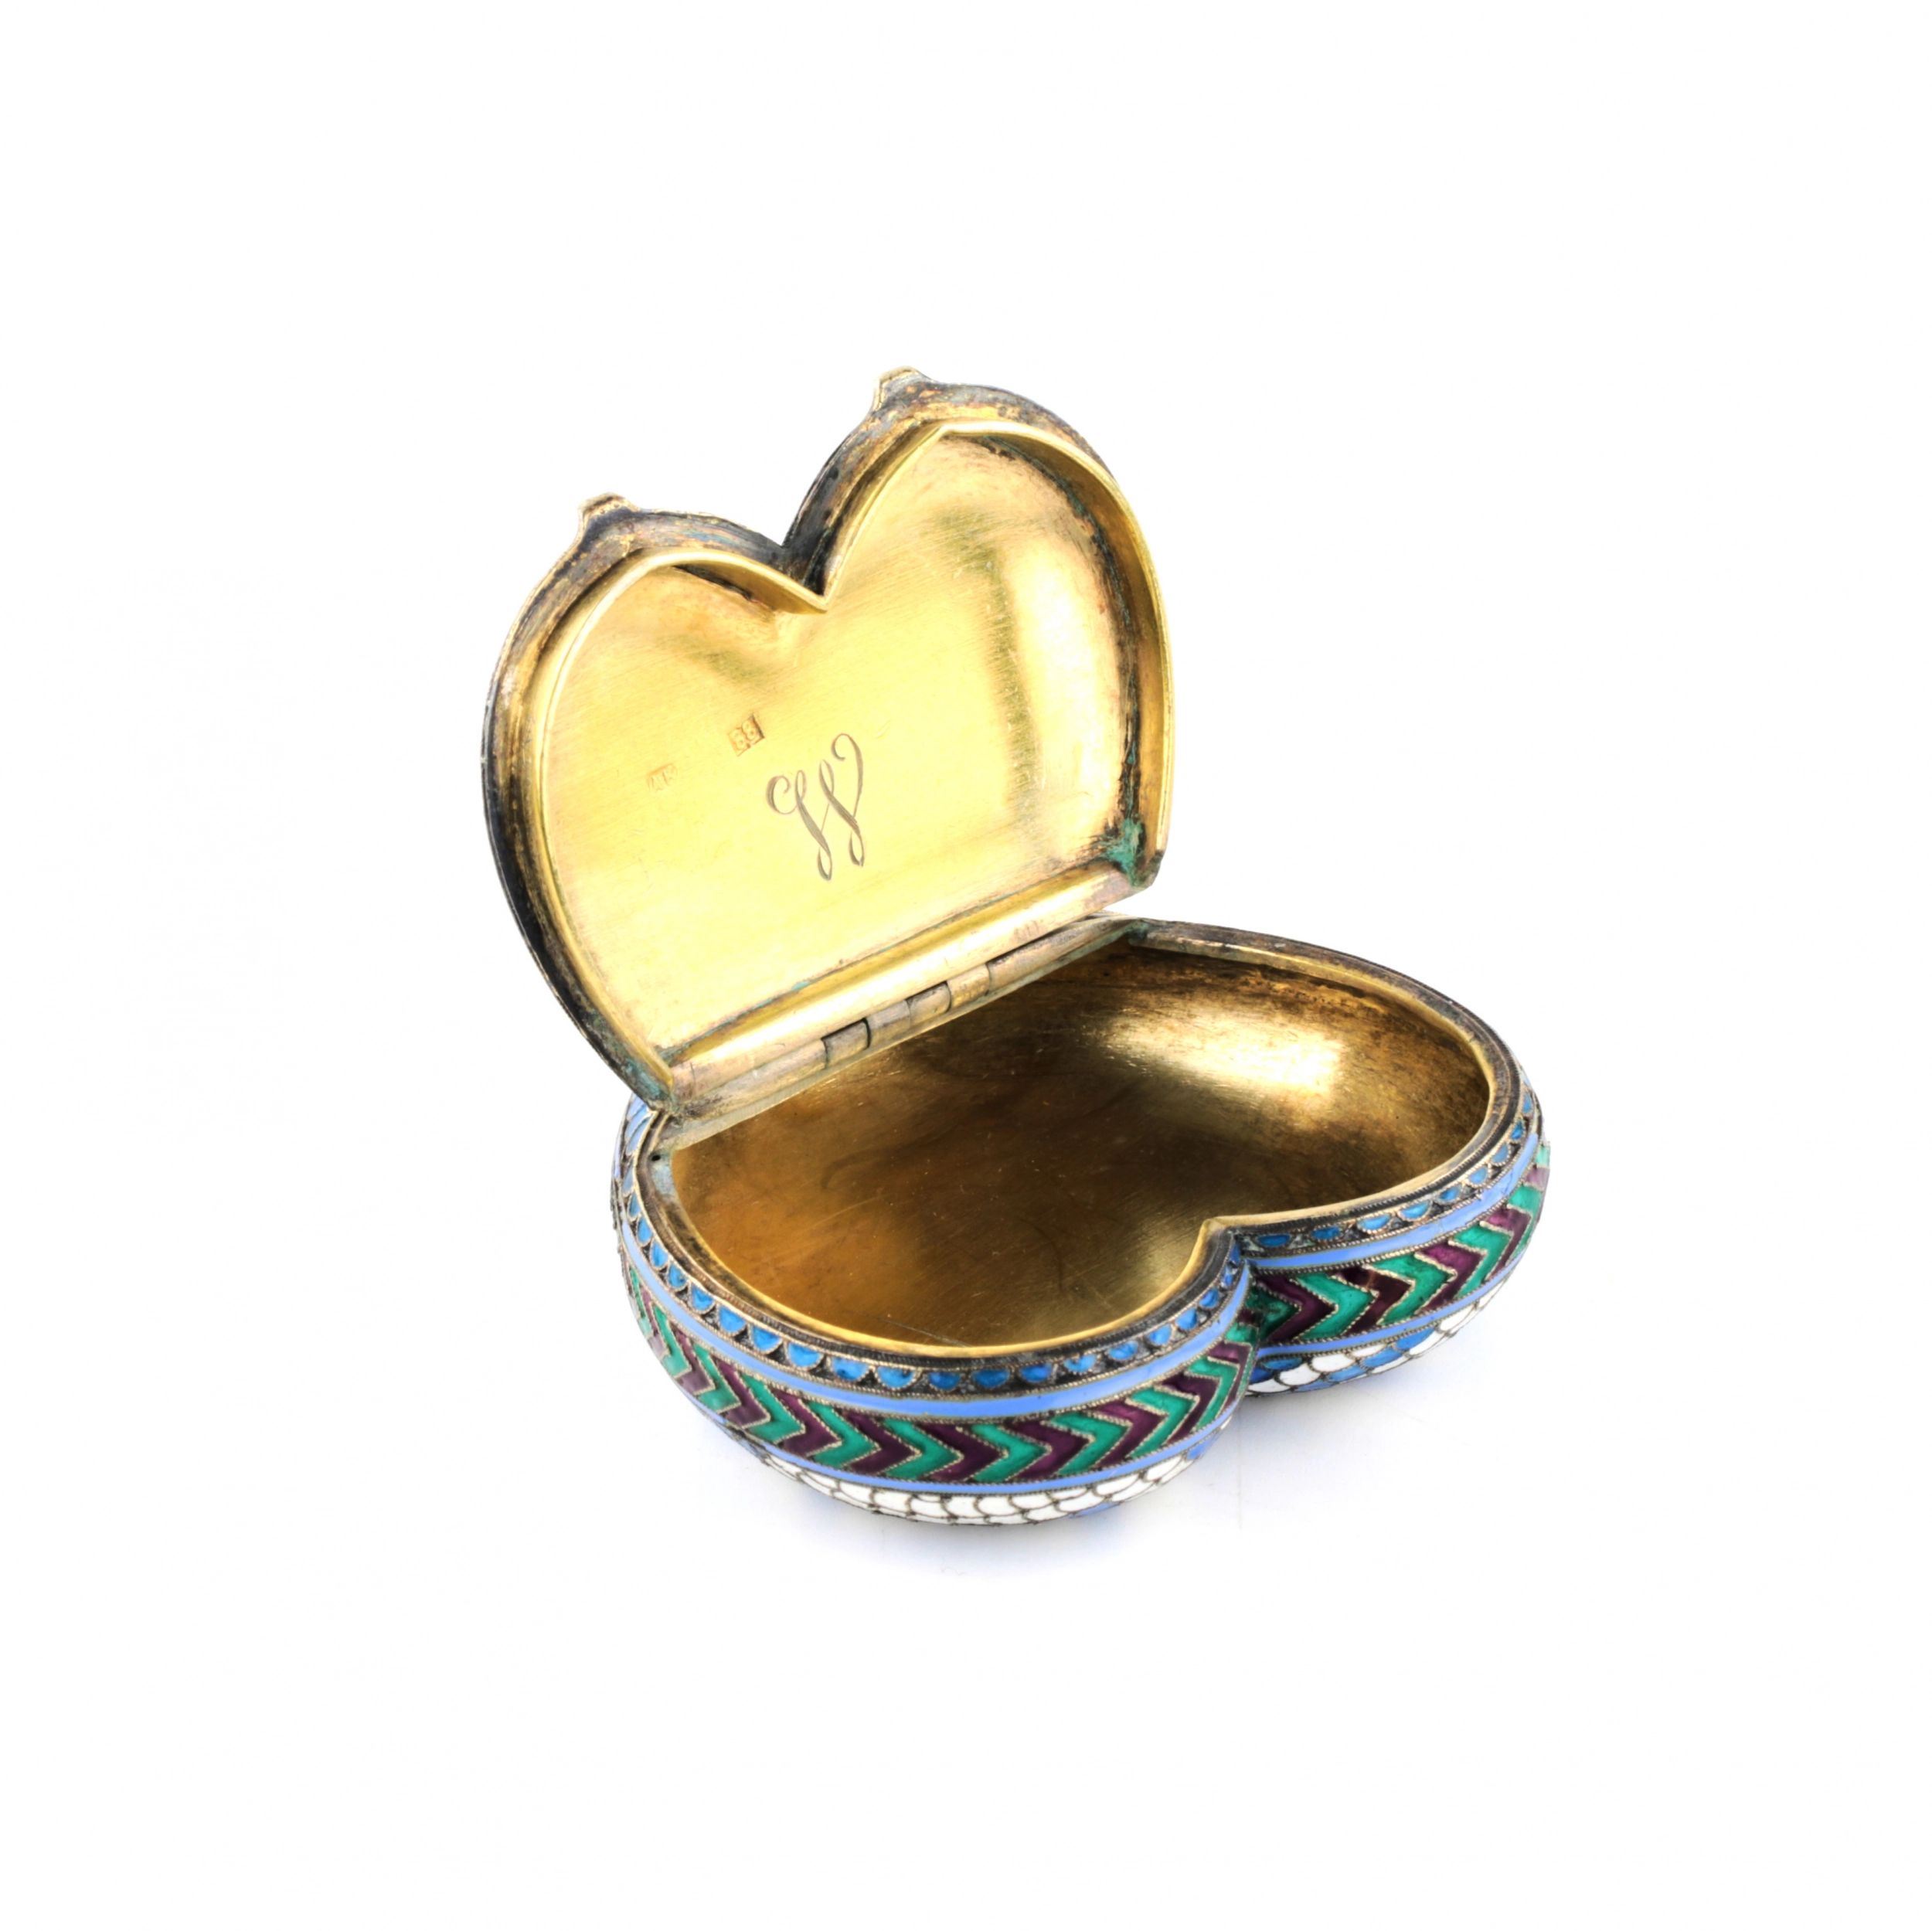 Silver snuffbox - heart. Antip Ivanovich Kuzmichev. End of the 19th century. - Image 3 of 7